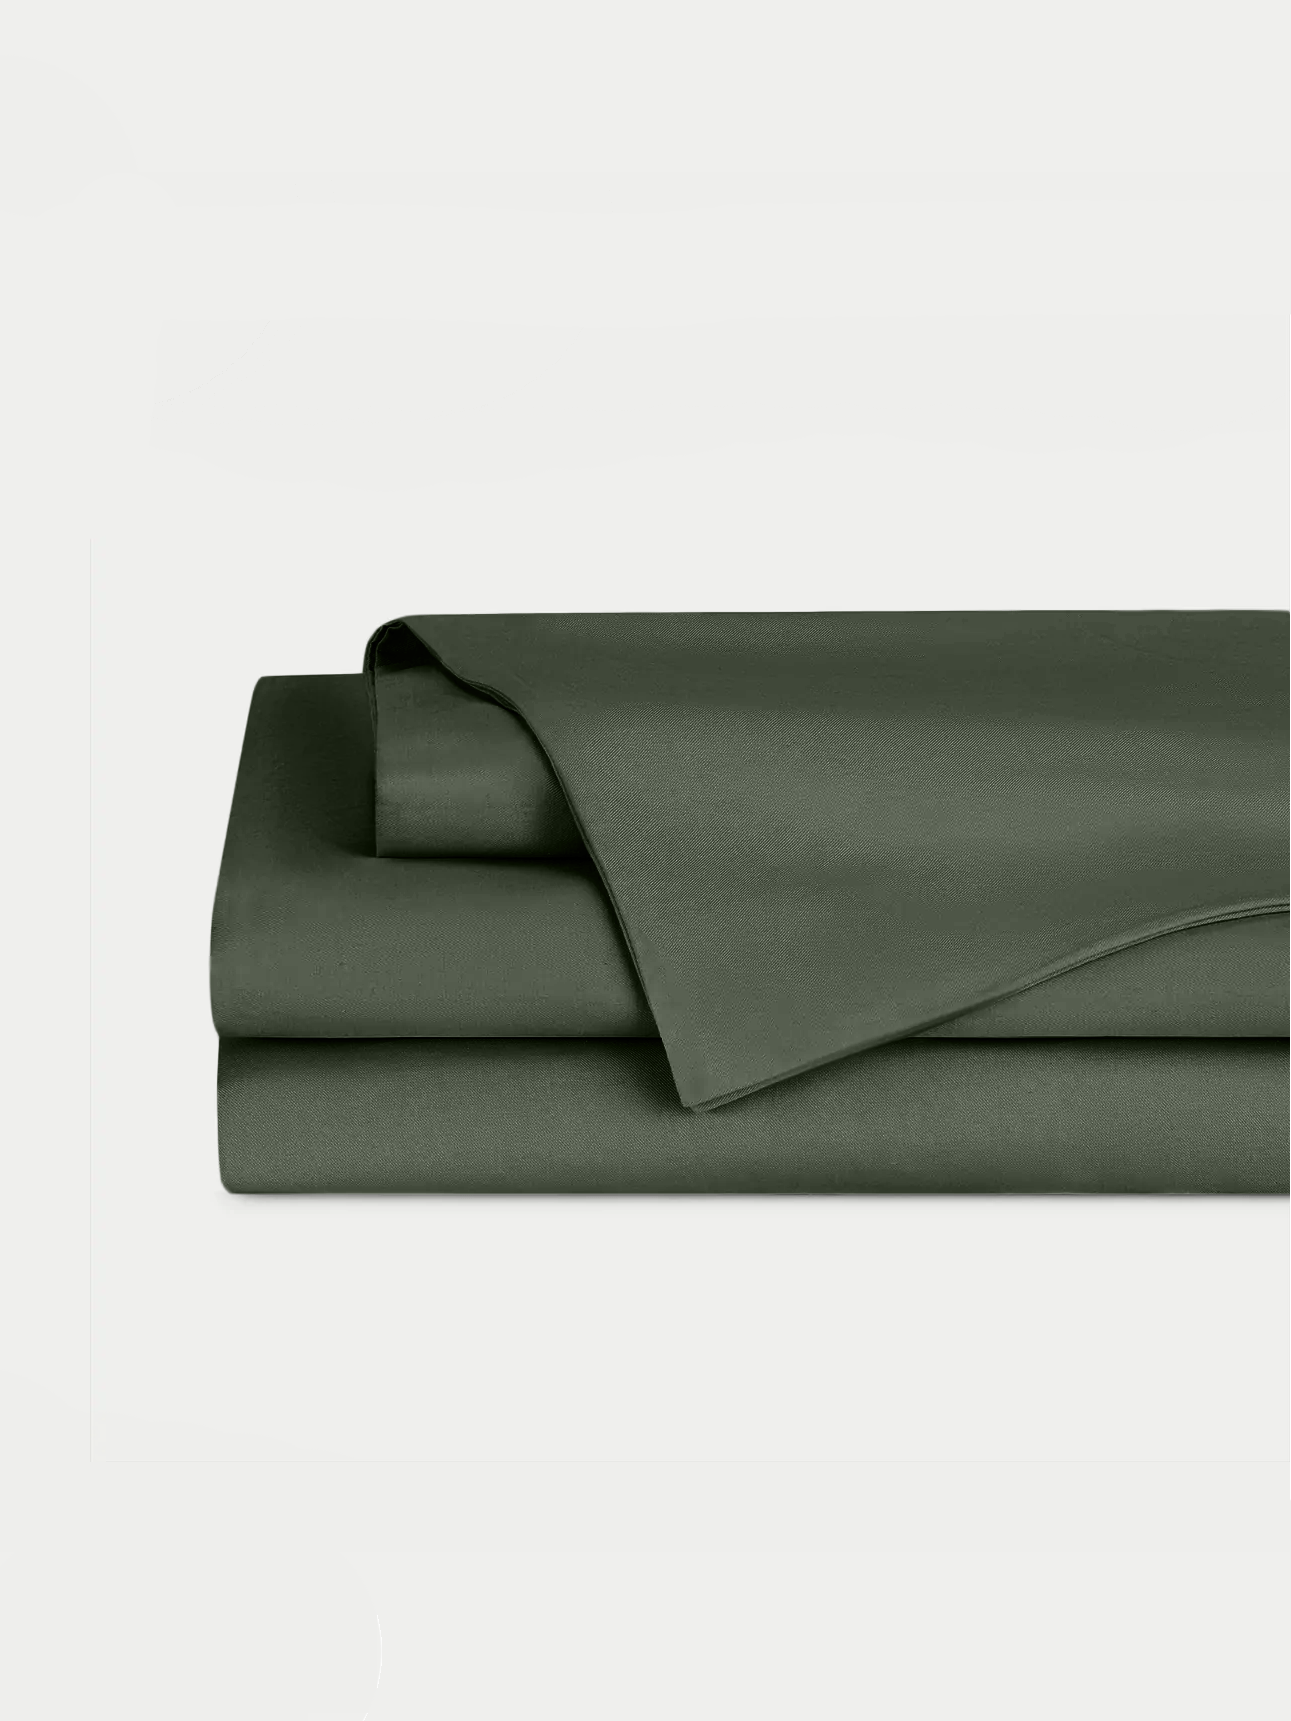 Olive Bamboo Linen Sheet Set neatly folded over a white background. |Color: Olive